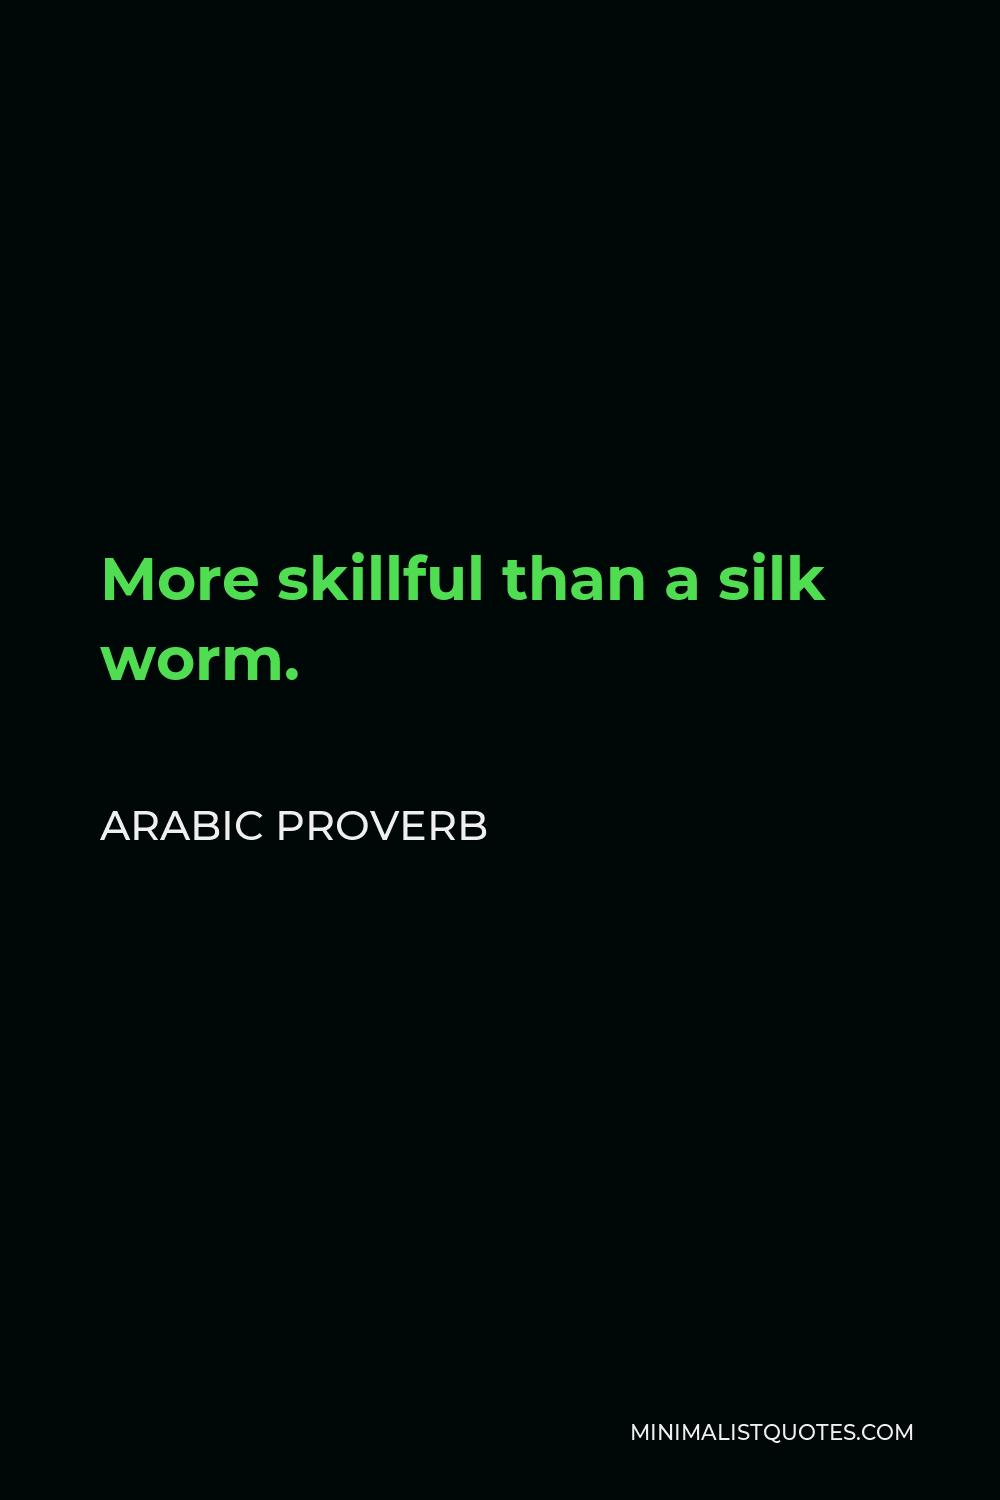 Arabic Proverb Quote - More skillful than a silk worm.